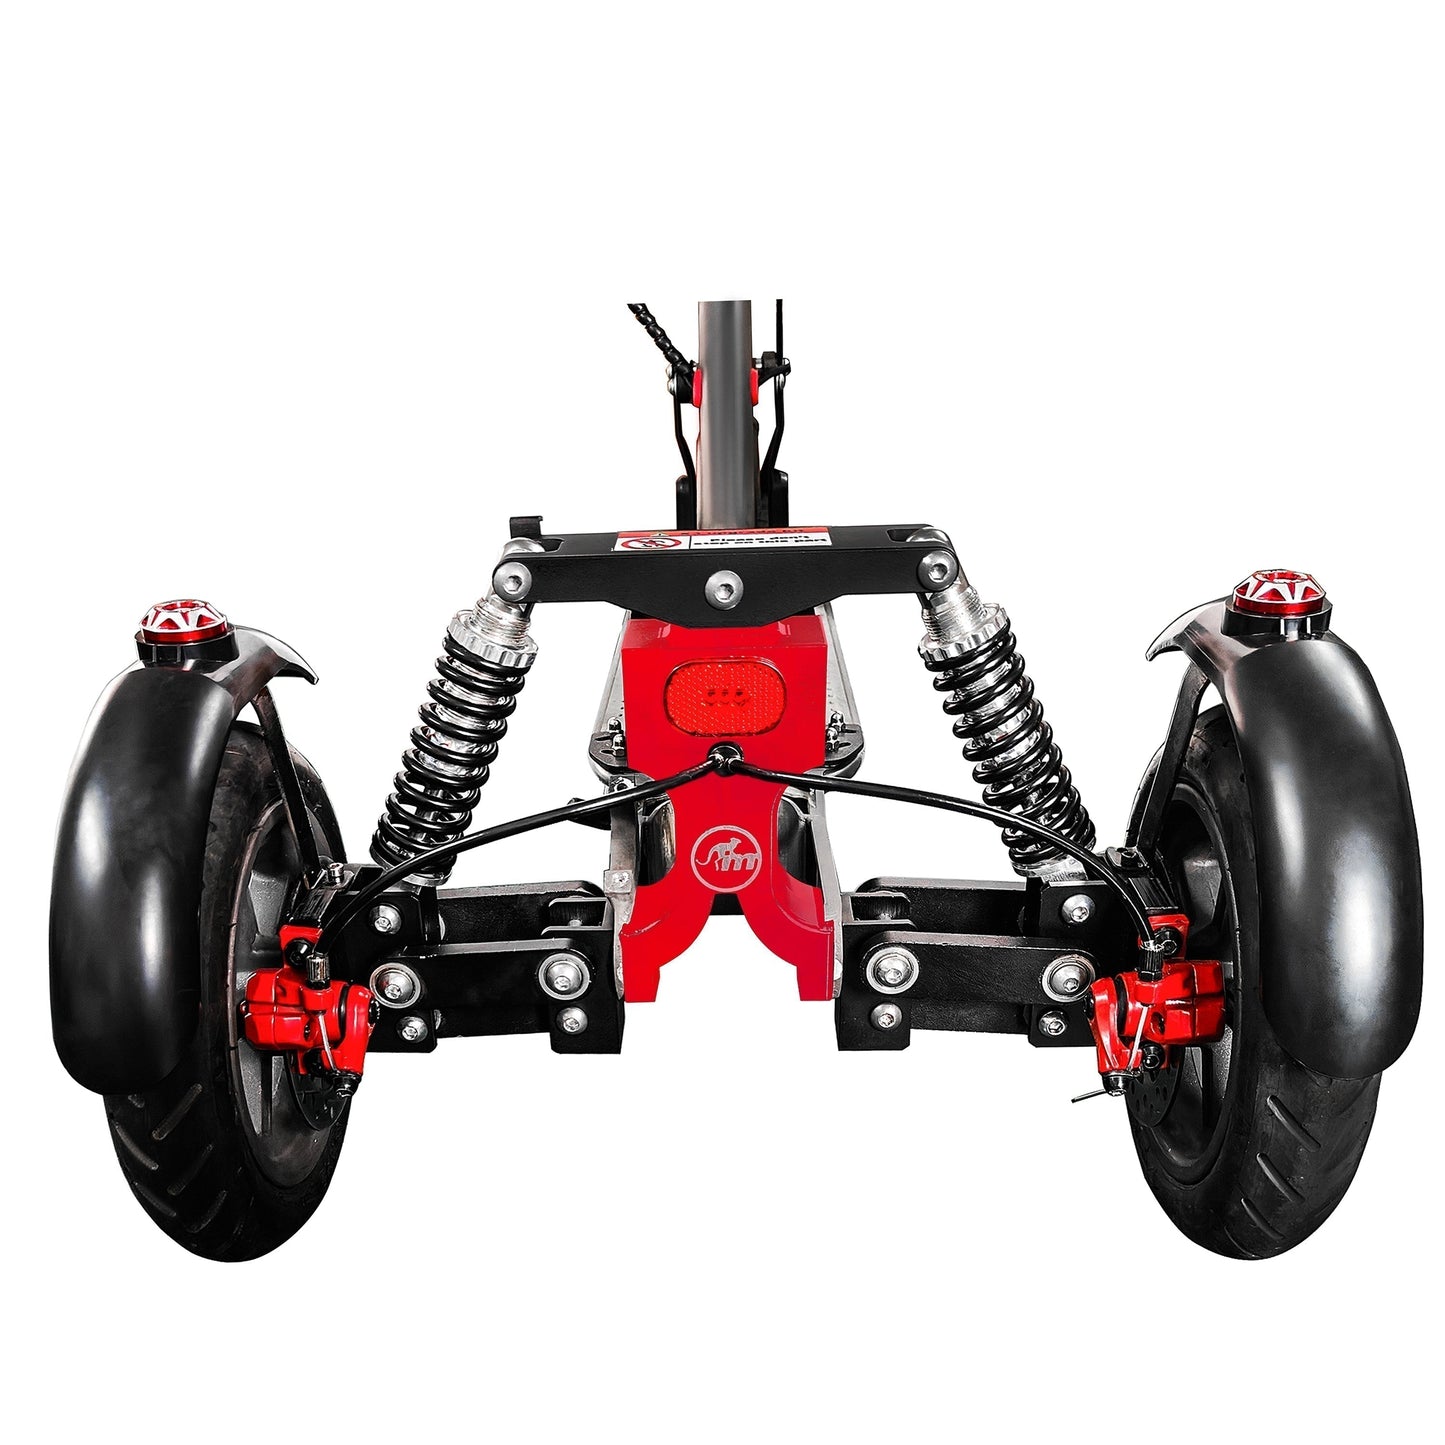 Monorim X3 upgrade kit to be Three wheels special for Kingsong X1 pro frames